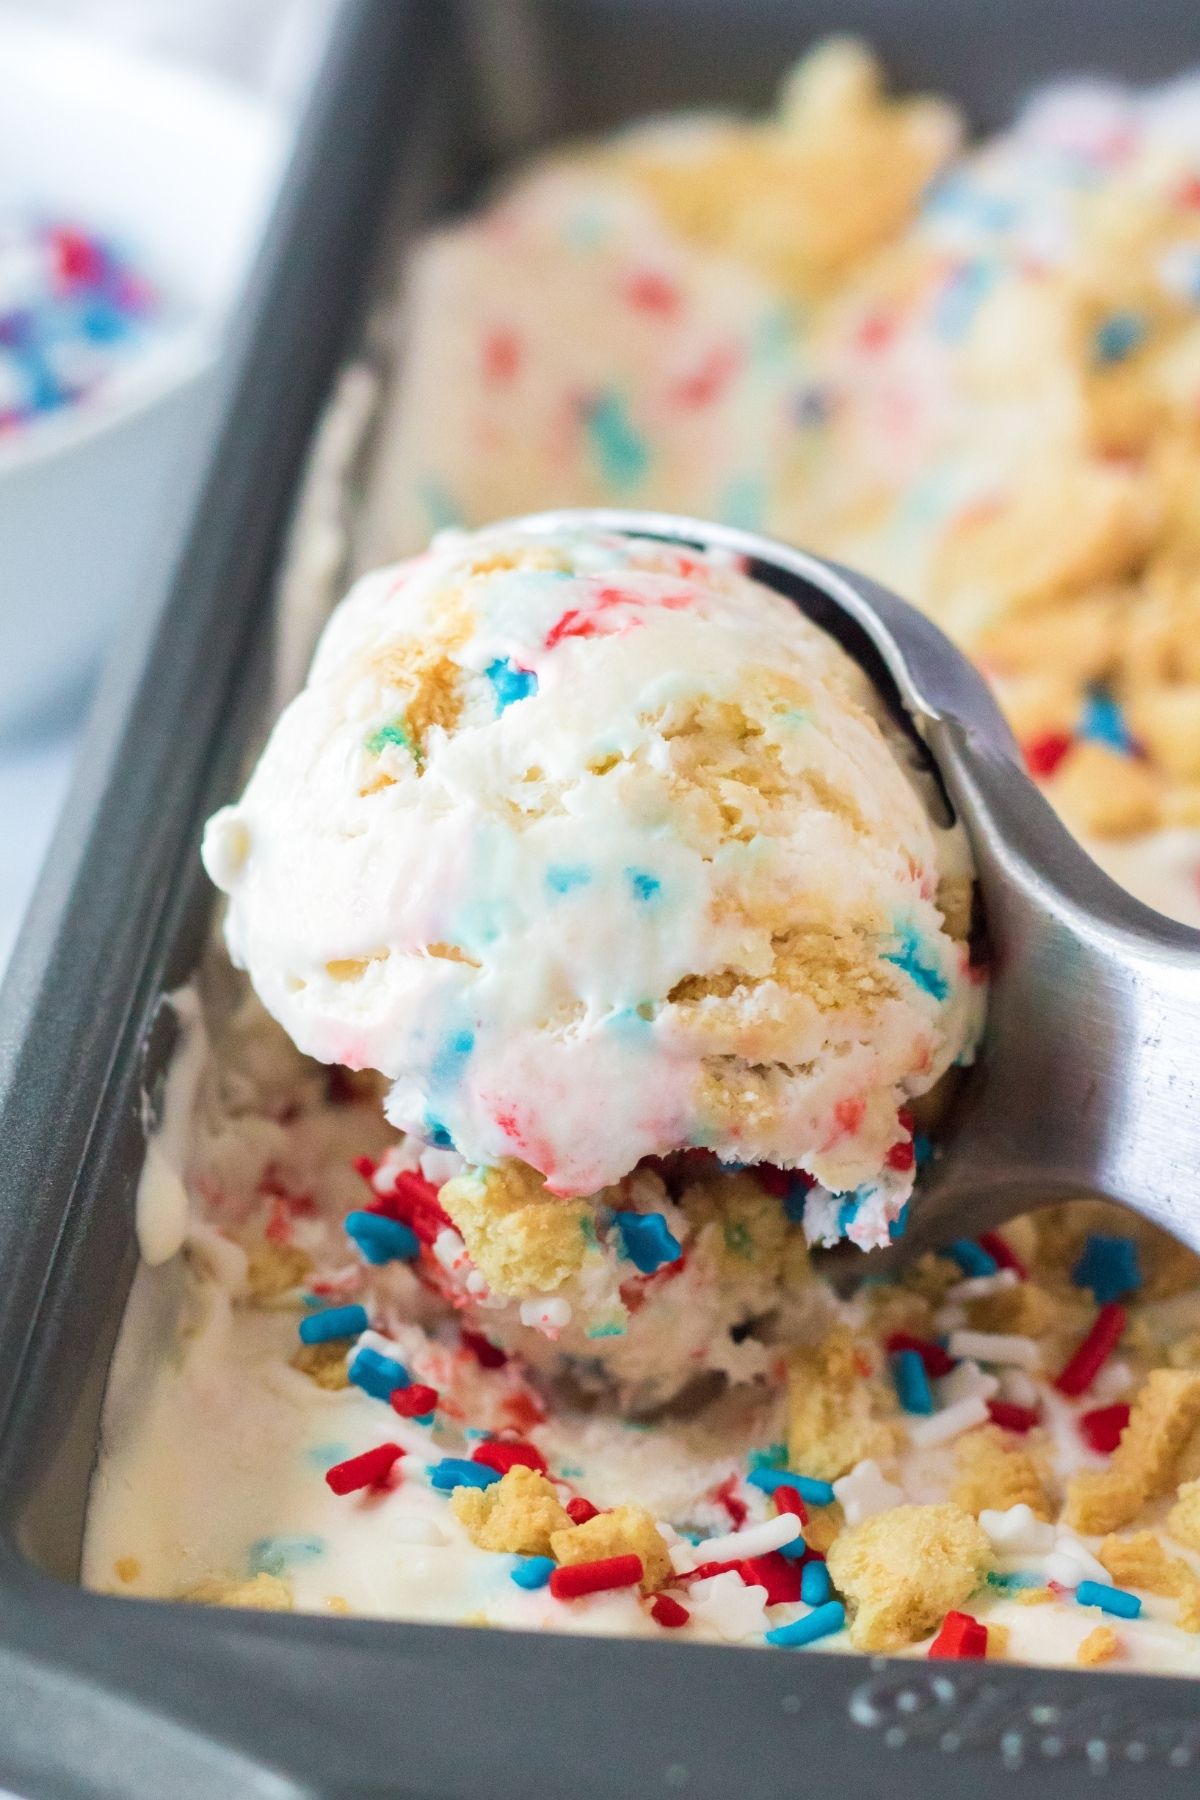 ice cream scoop scooping vanilla ice cream with red, white and blue sprinkles in it